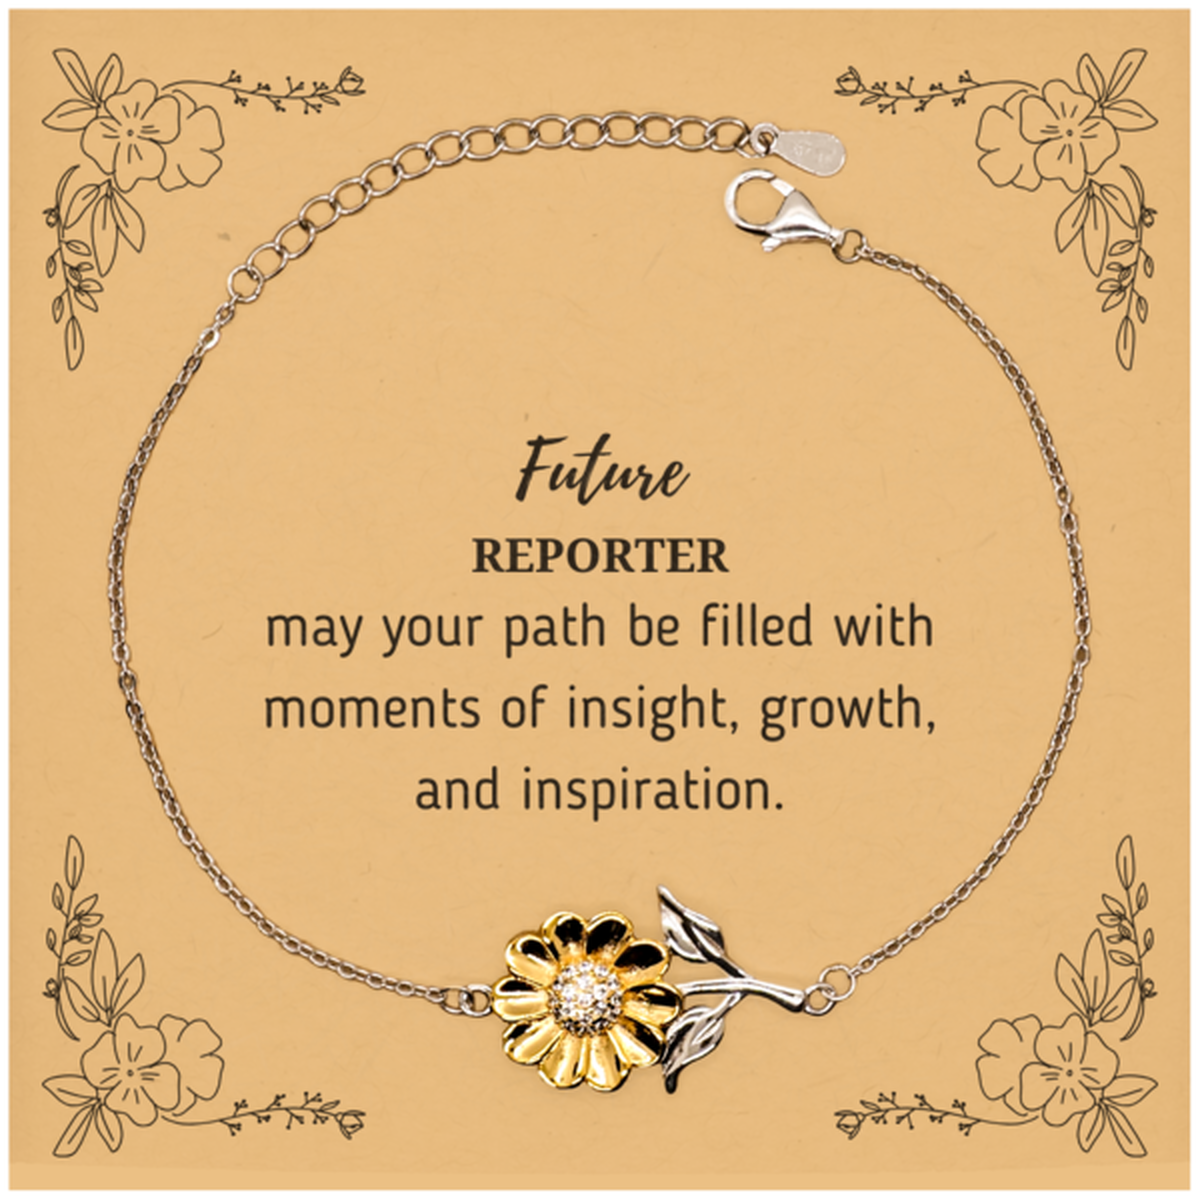 Future Reporter Gifts, May your path be filled with moments of insight, Graduation Gifts for New Reporter, Christmas Unique Sunflower Bracelet For Men, Women, Friends